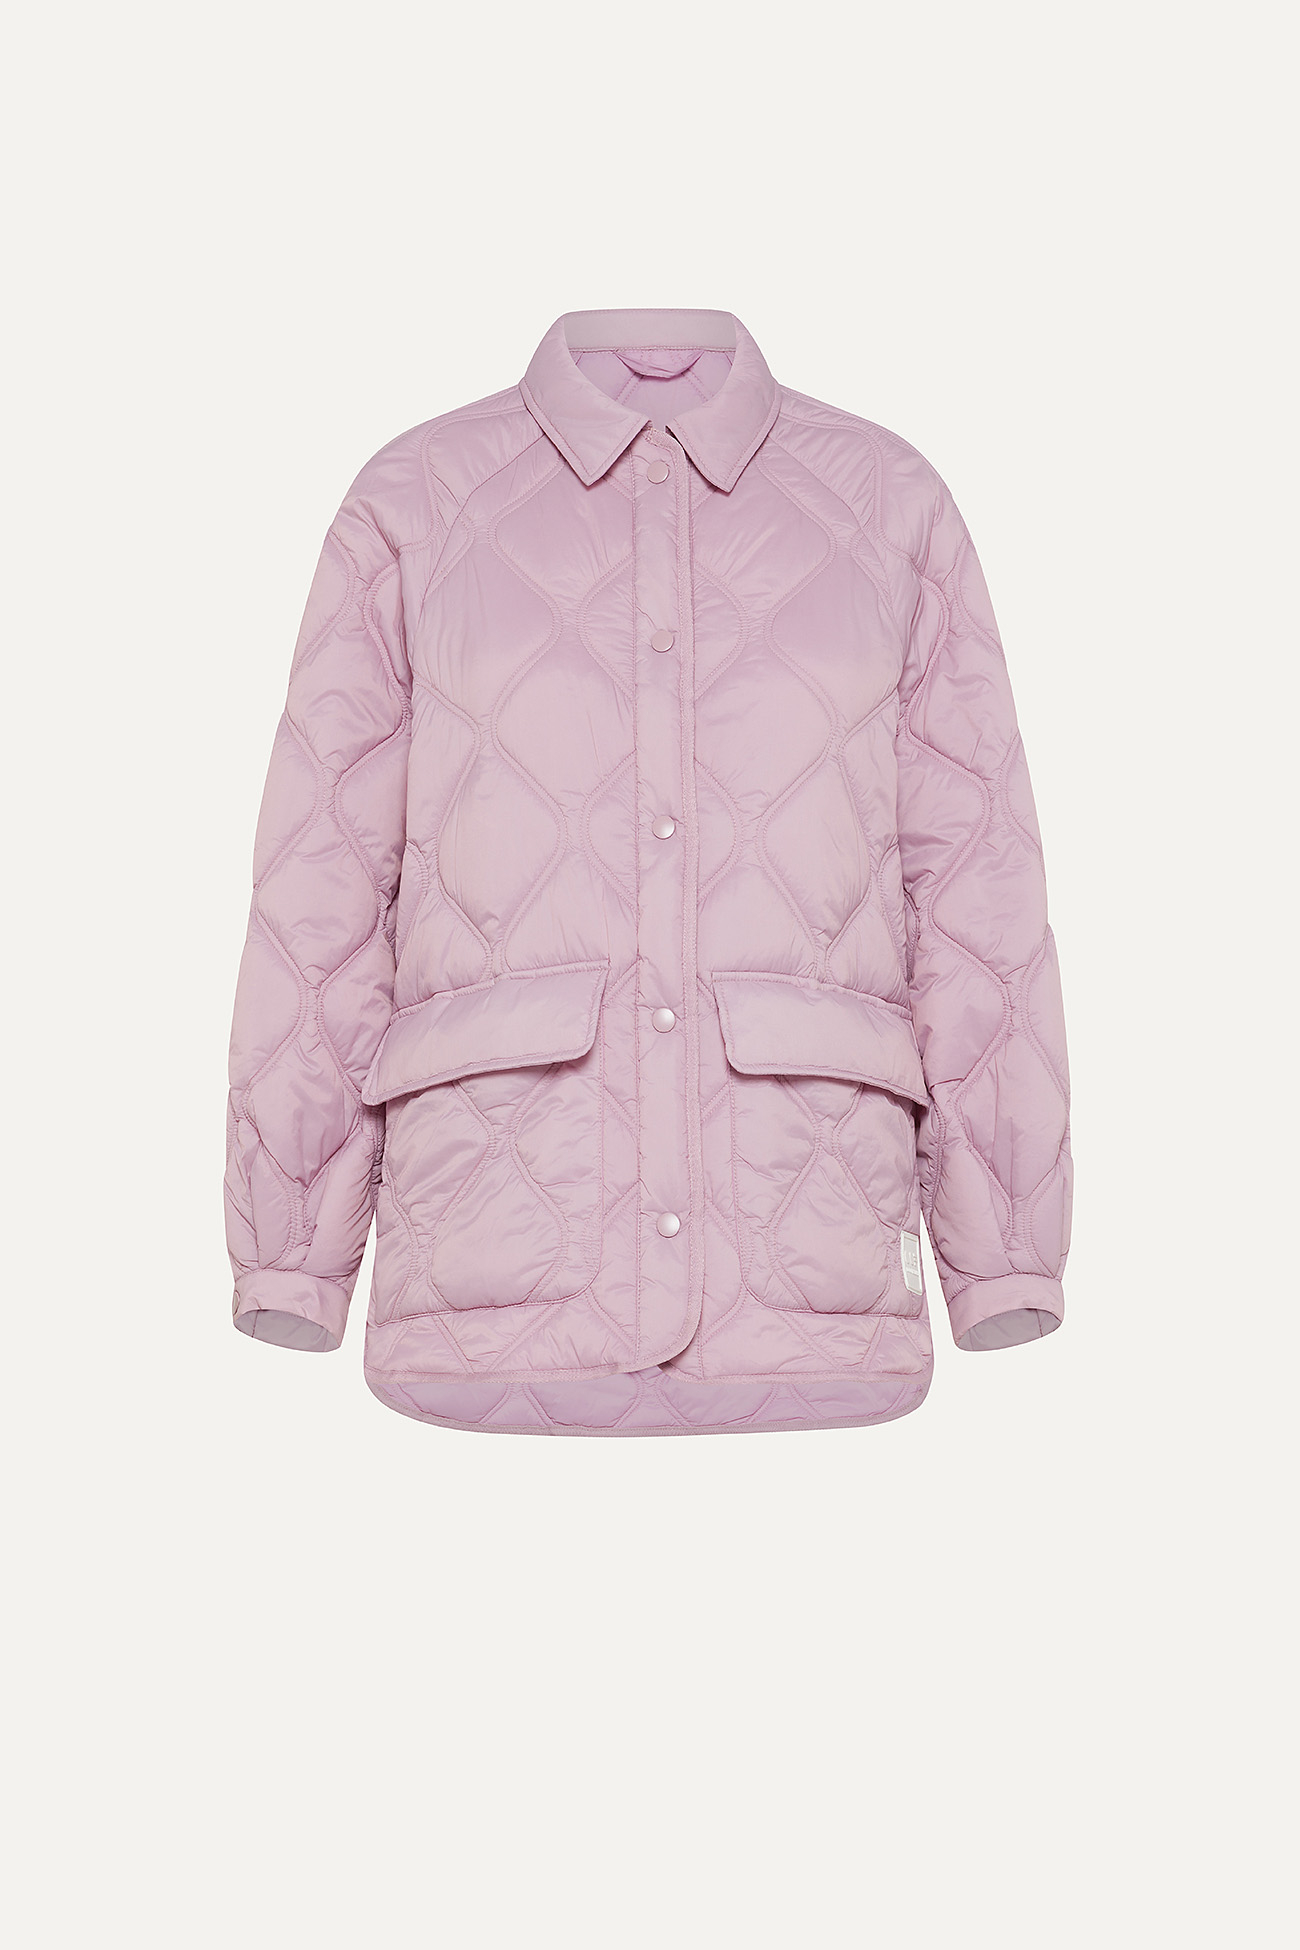 OVERSIZE SHACKET IN QUILTED LIGHT NYLON 9222 - PINK - OOF WEAR